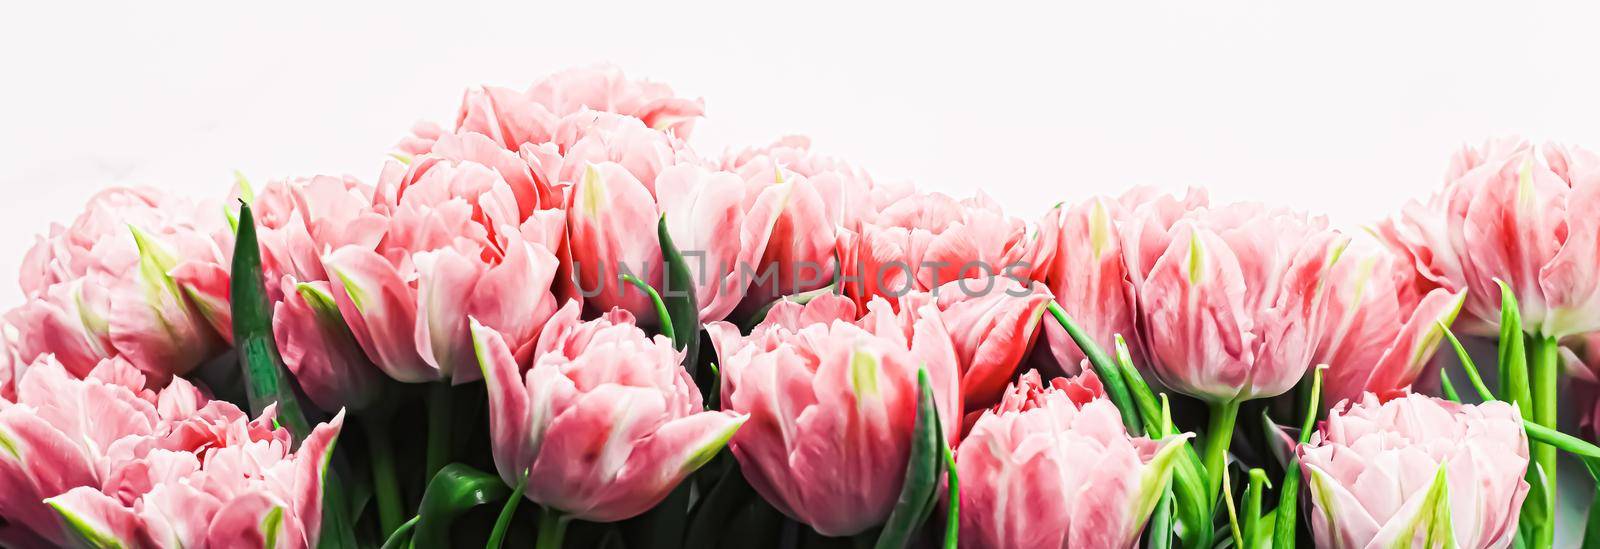 Spring flowers on marble background as holiday gift and floral flatlay concept